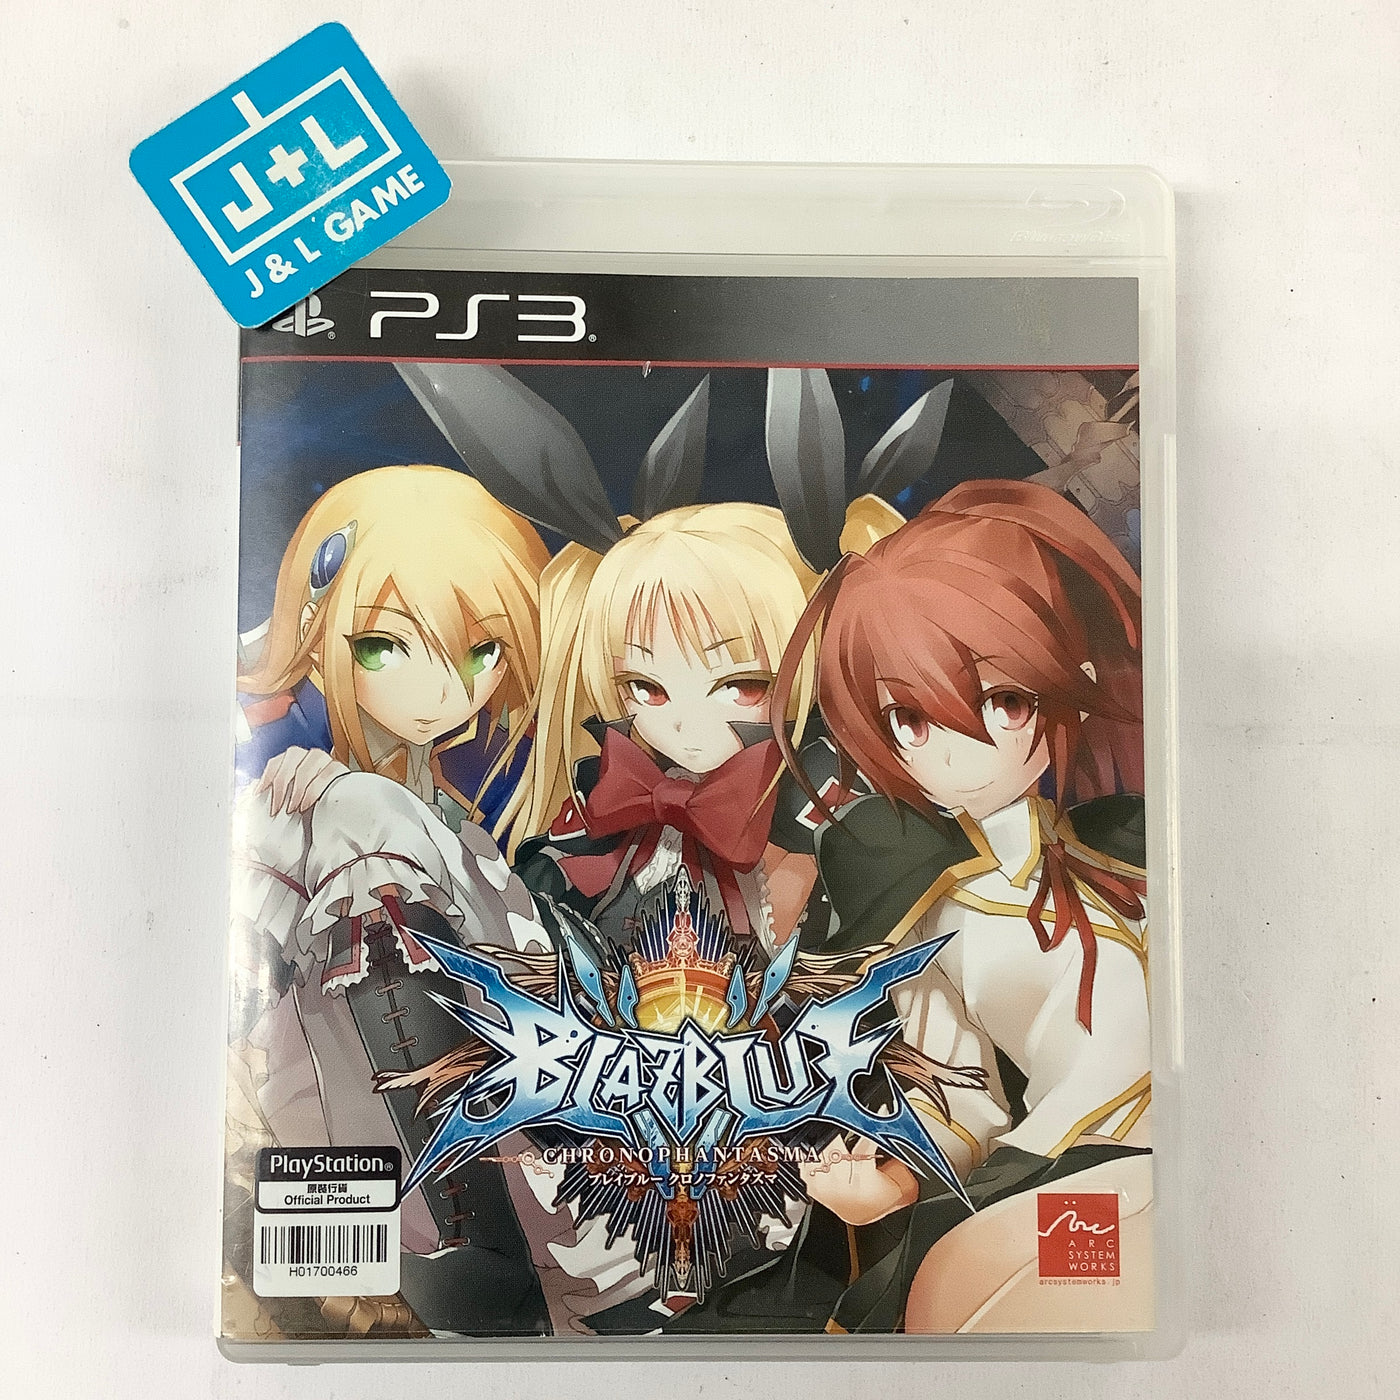 BlazBlue: Chrono Phantasma - (PS3) PlayStation 3 [Pre-Owned] (Asia Import) Video Games Arc System Works   